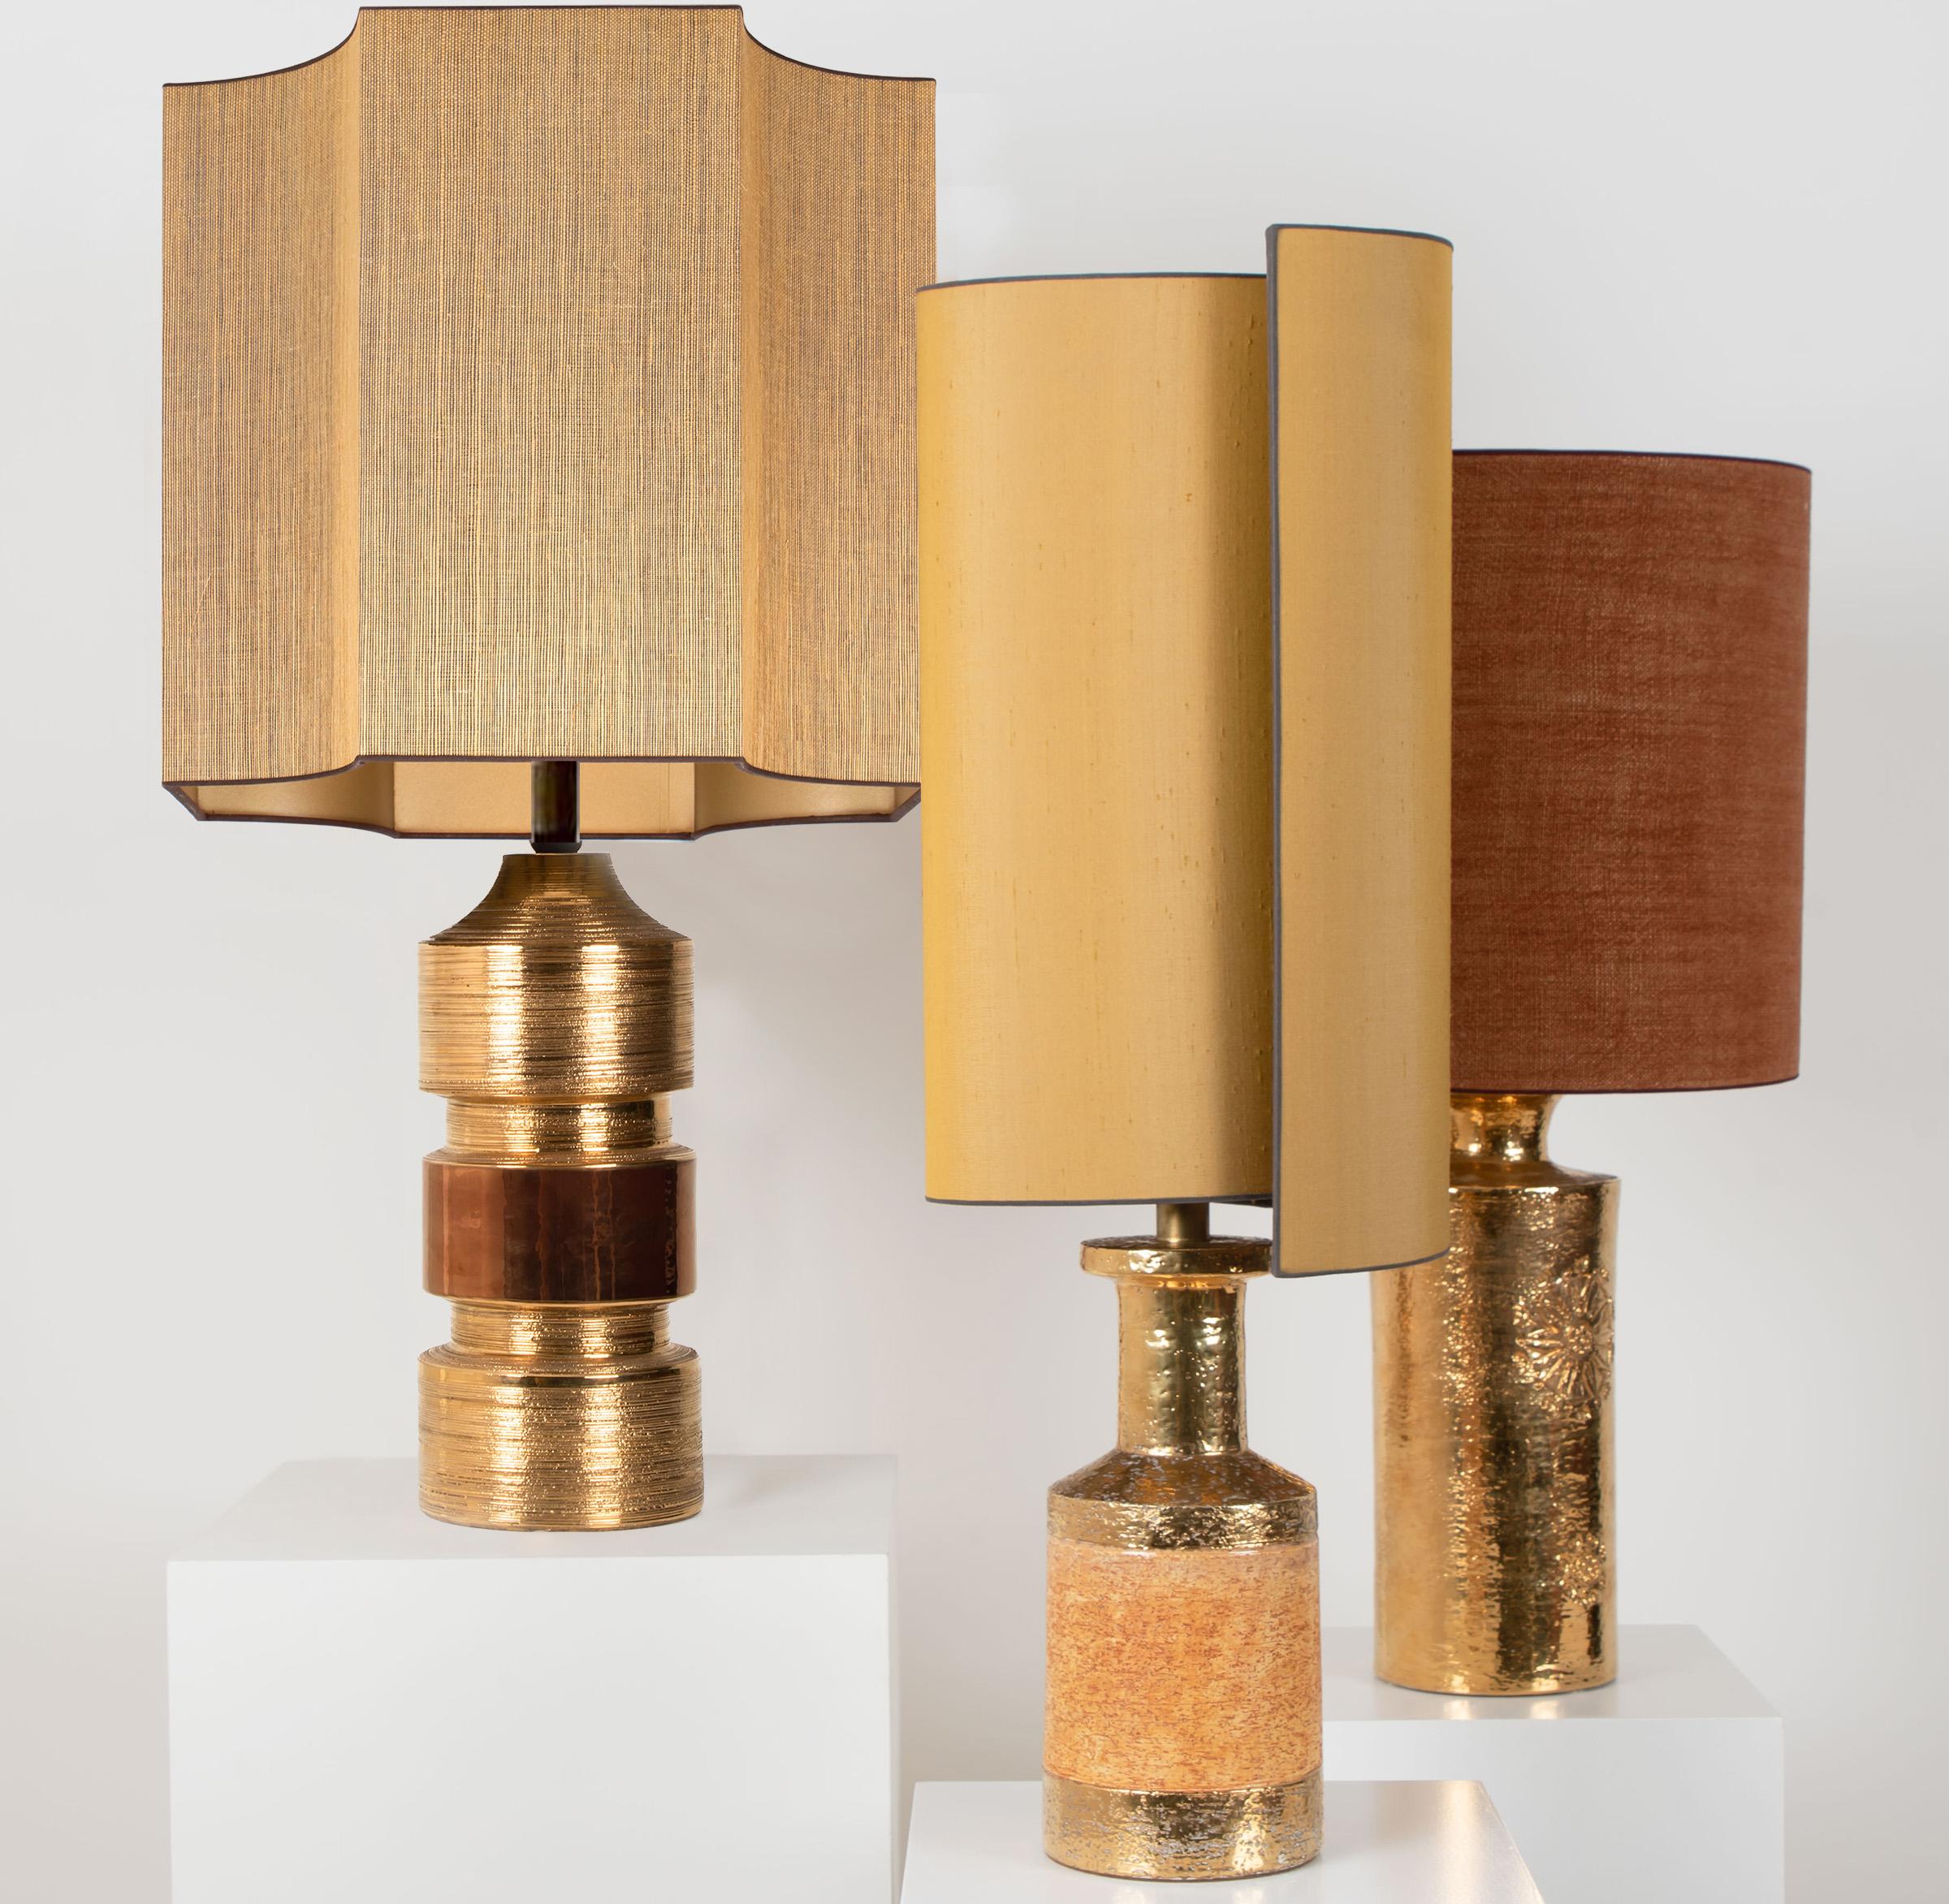 Pair of Bitossi Lamps, with Custom Made Shades by Rene Houben For Sale 3